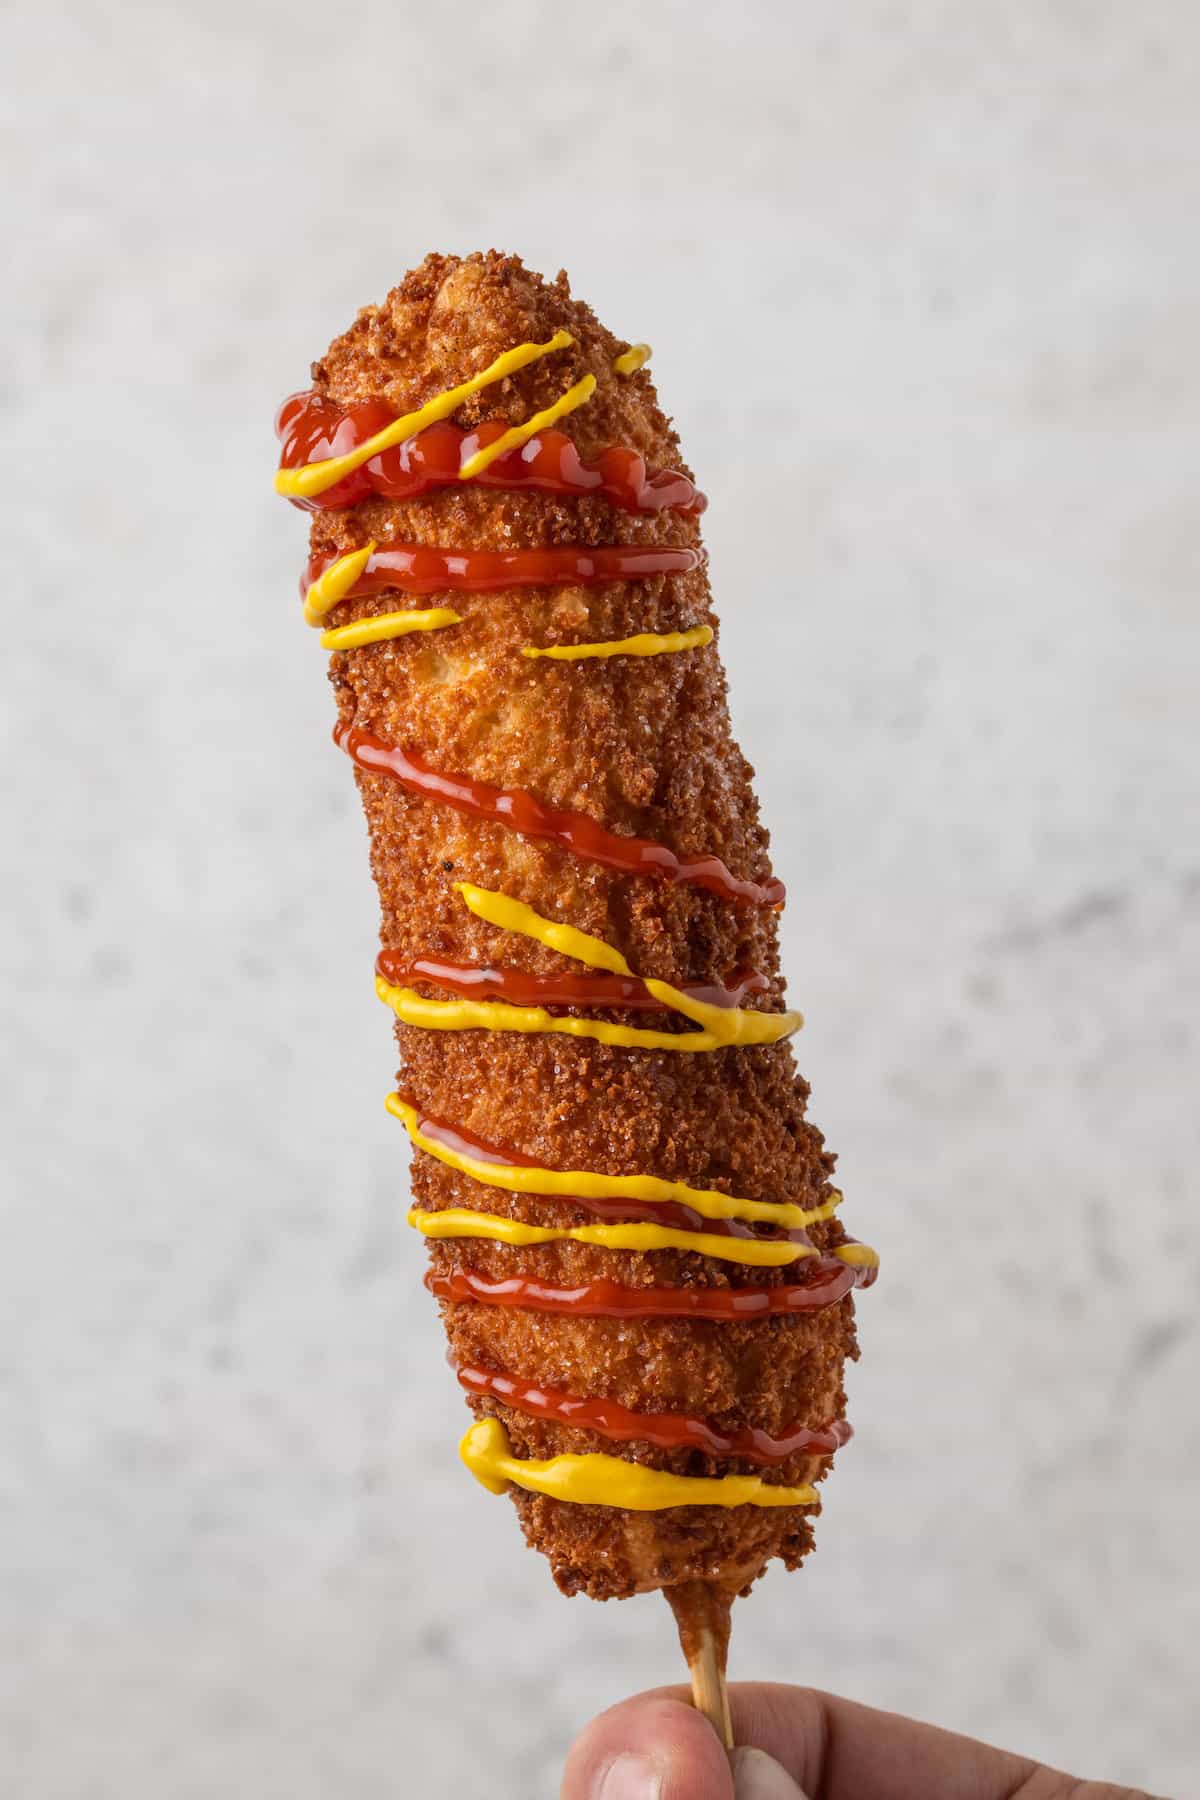 A gluten-free korean corn dog on a skewer and dressed with ketchup and mustard.